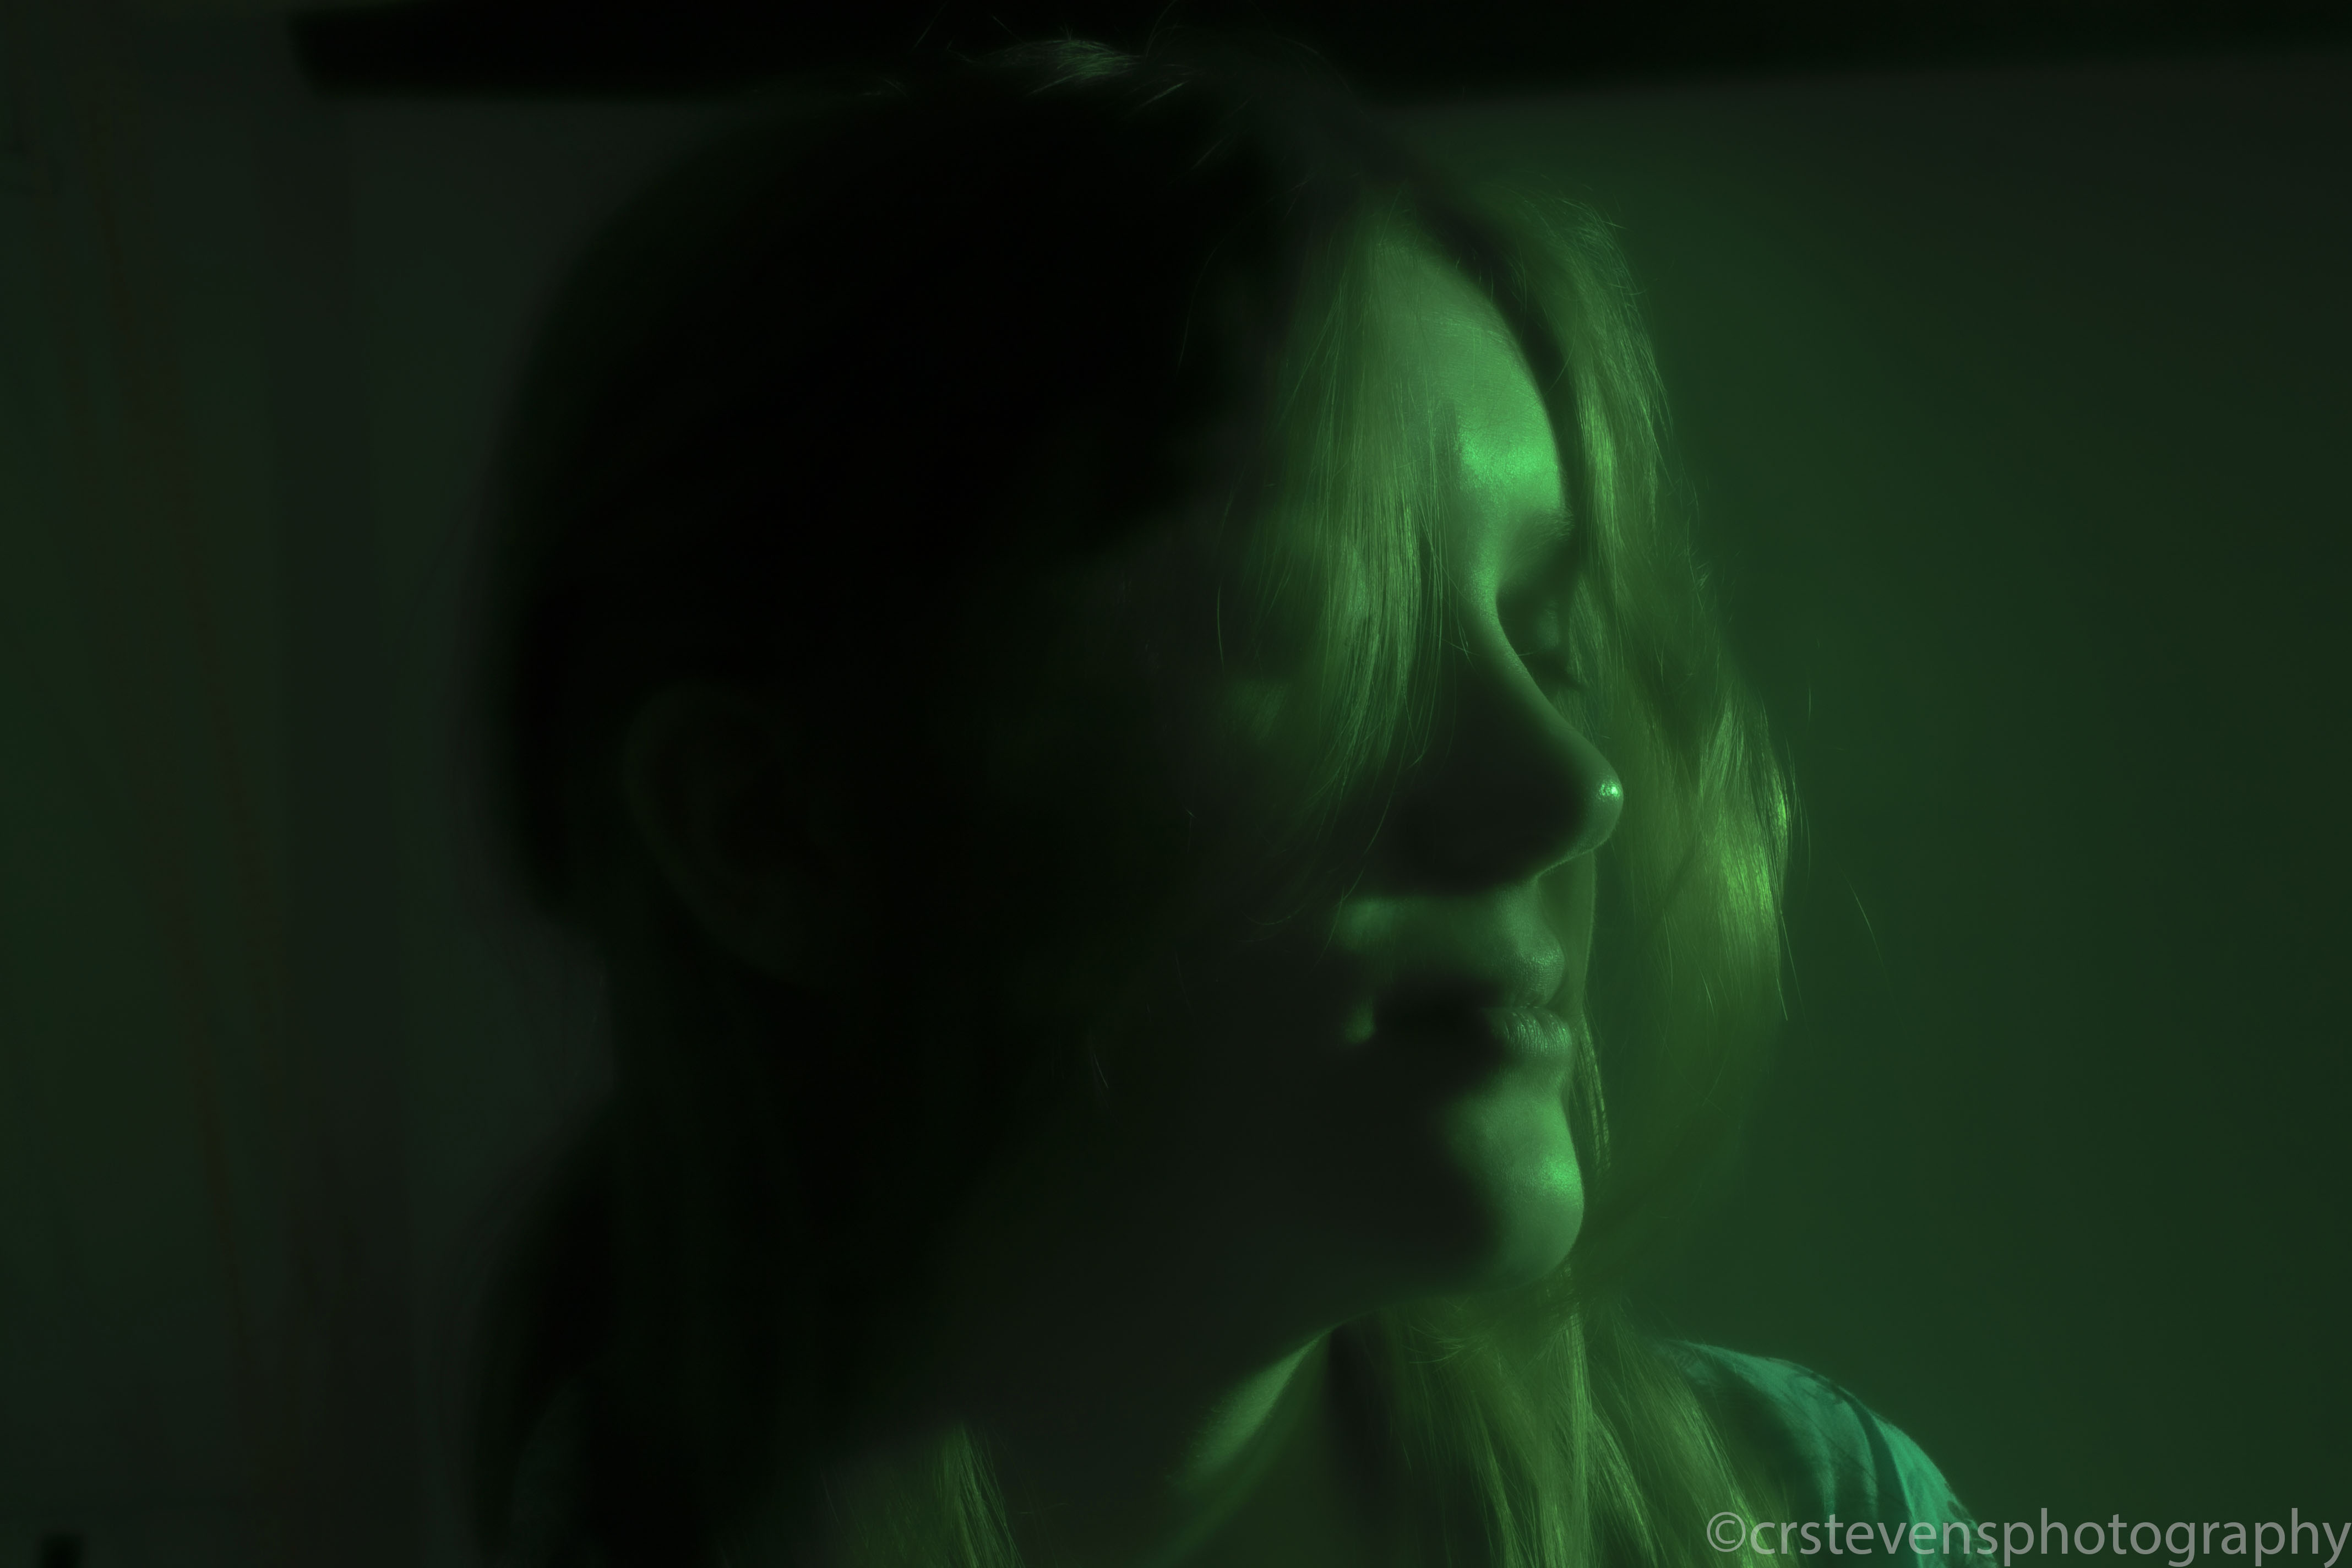 a close up of someones face with their eyes closed and green lighting with a foggy background